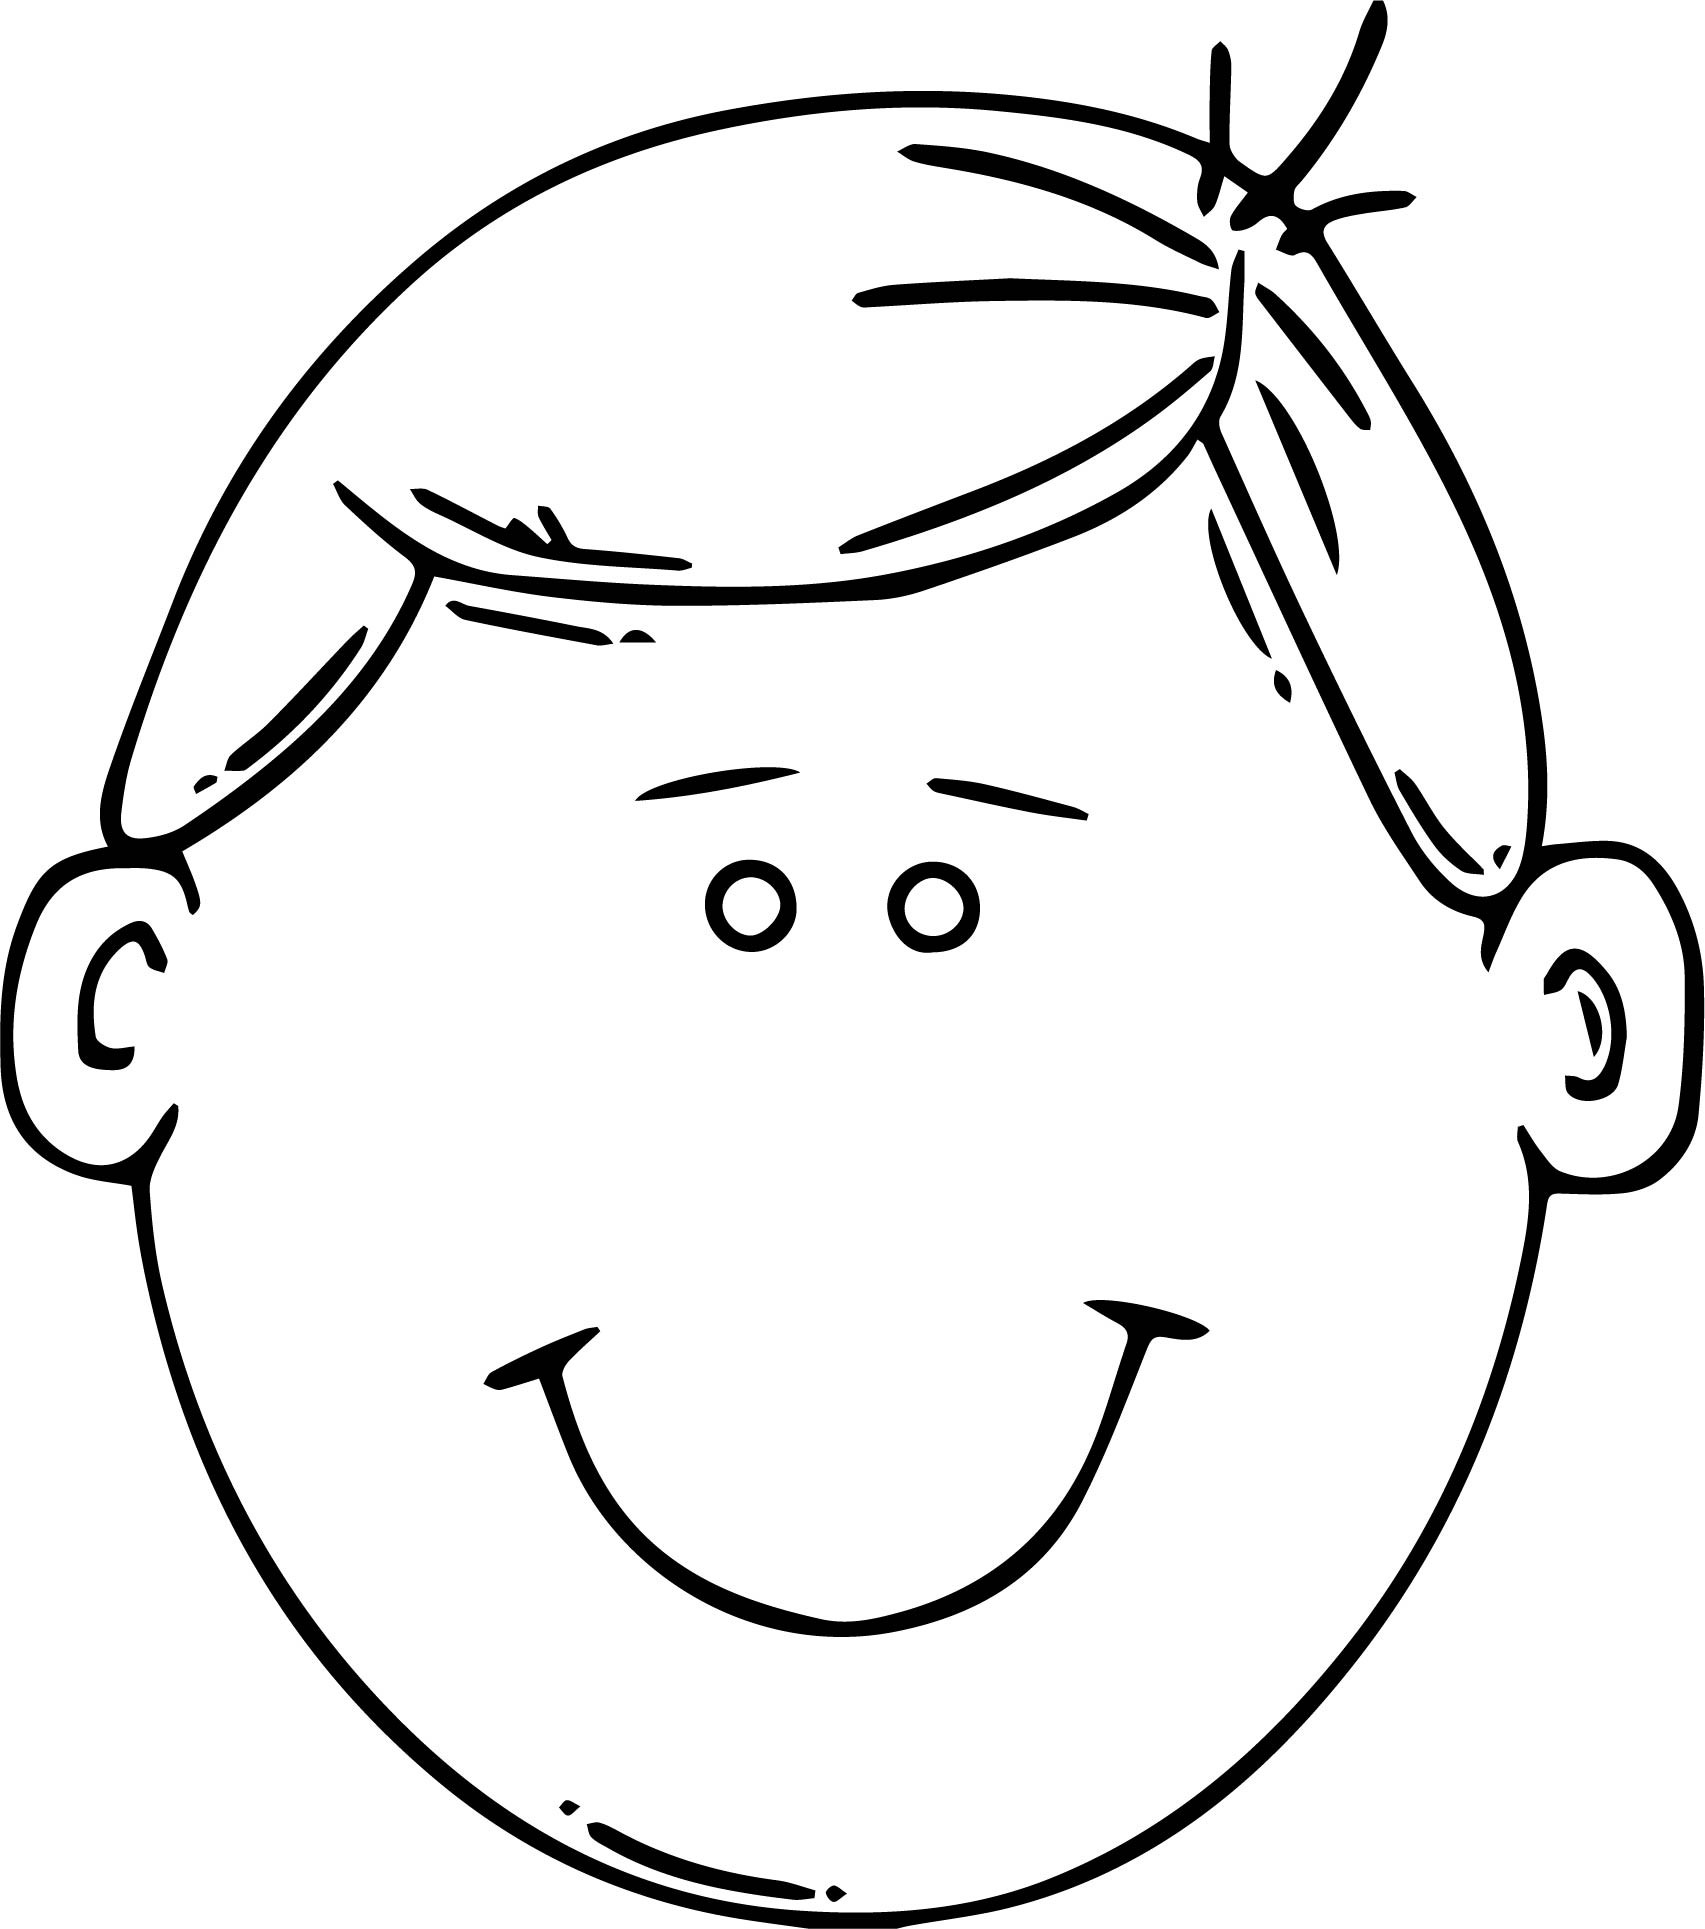 Coloring Pages Of Faces Of Boys
 Great Boy Face Coloring Page